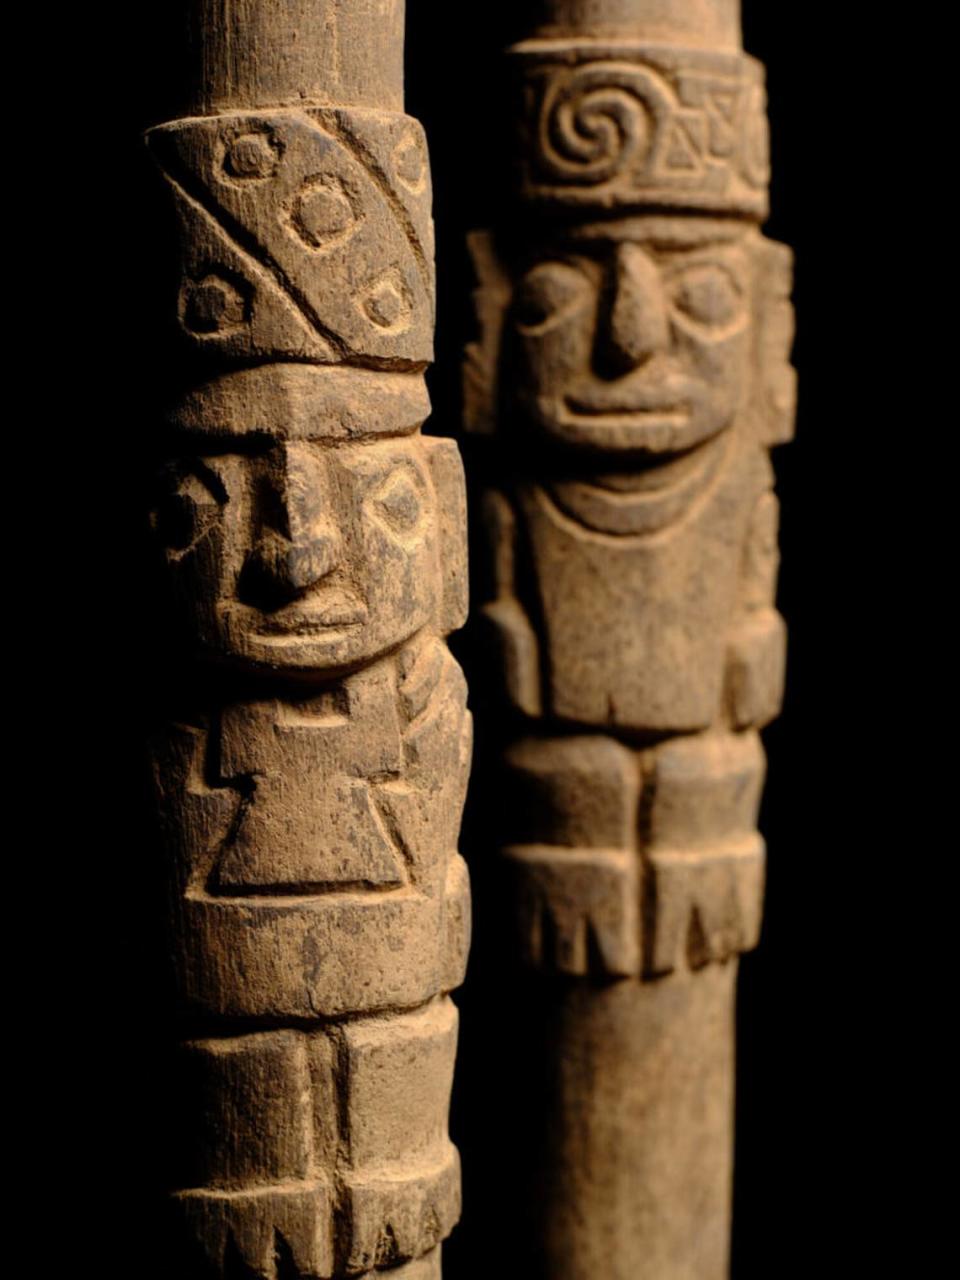 The team also found two wooden staffs with carved depictions of deities. /© M.Giersz, ed. K. Kowalewski